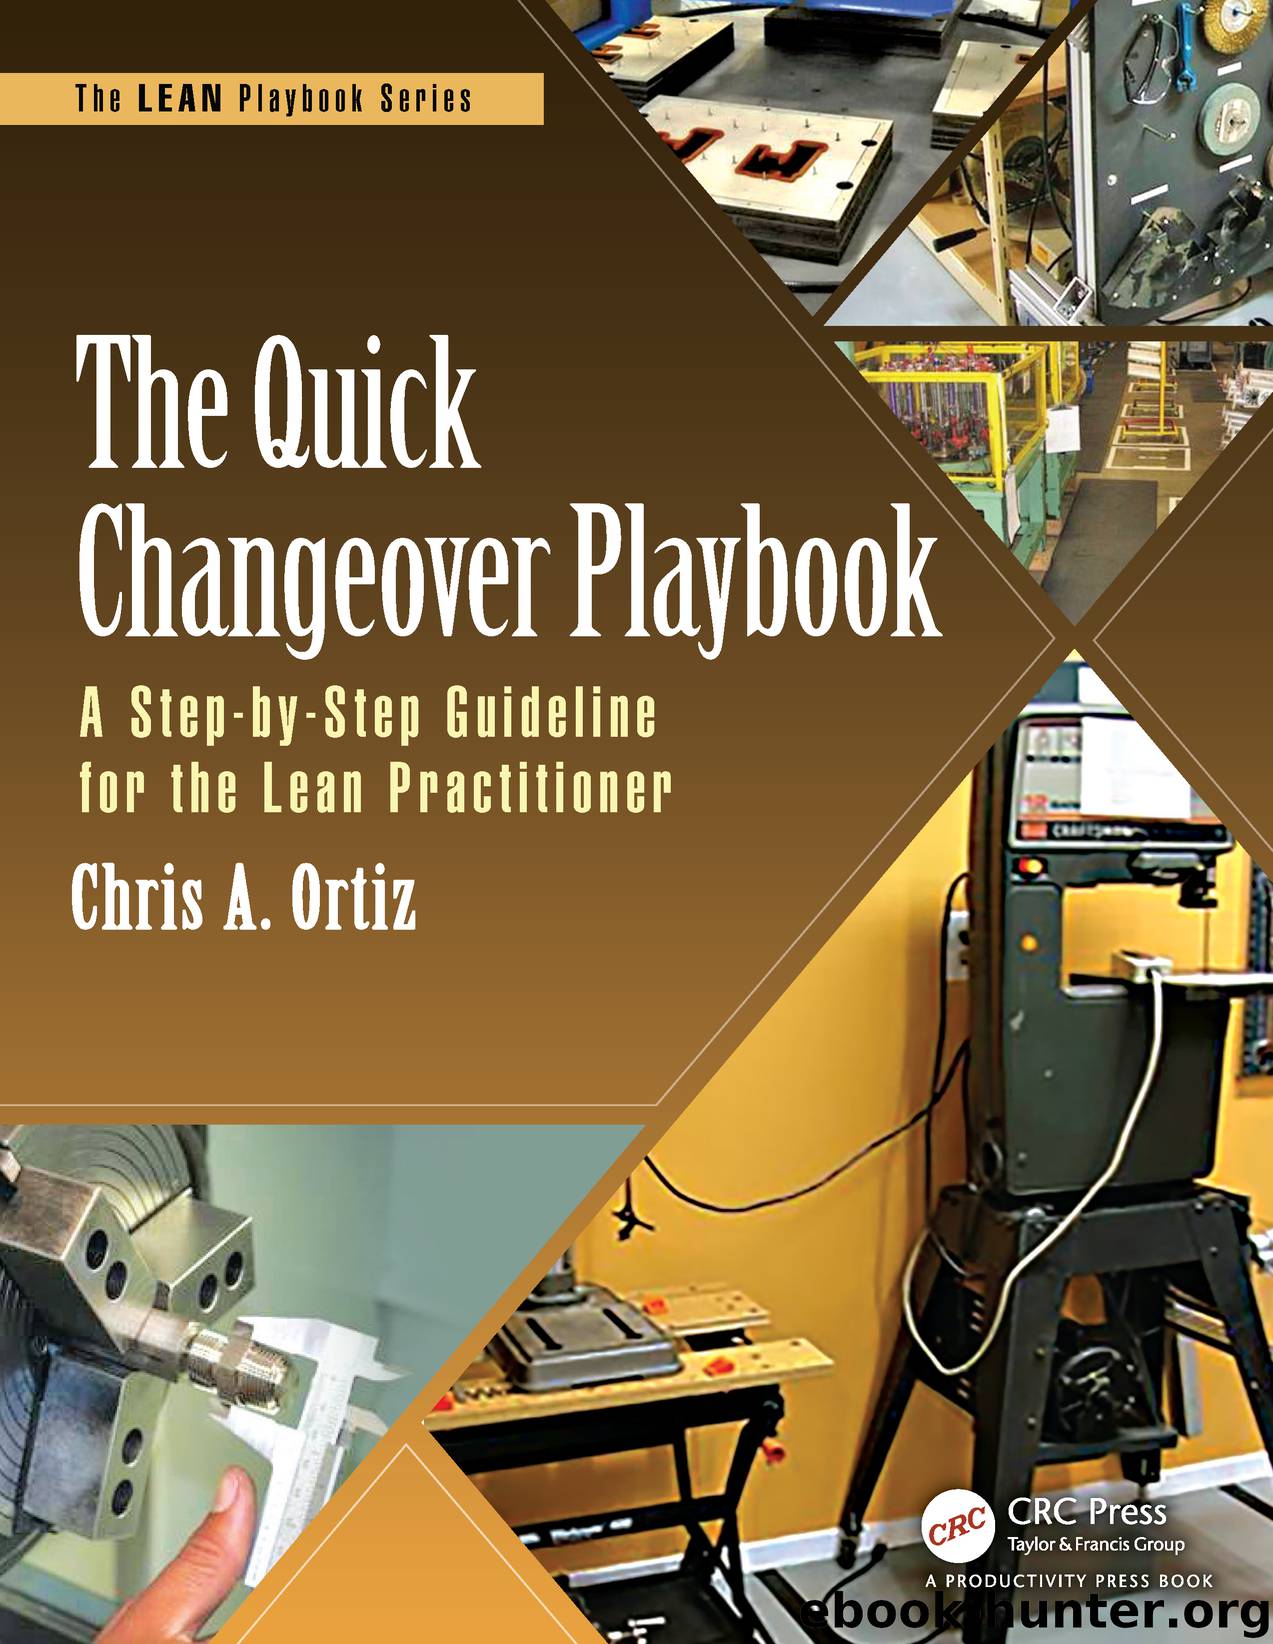 The Quick Changeover Playbook: A Step-by-Step Guideline for the Lean Practitioner by Chris A. Ortiz